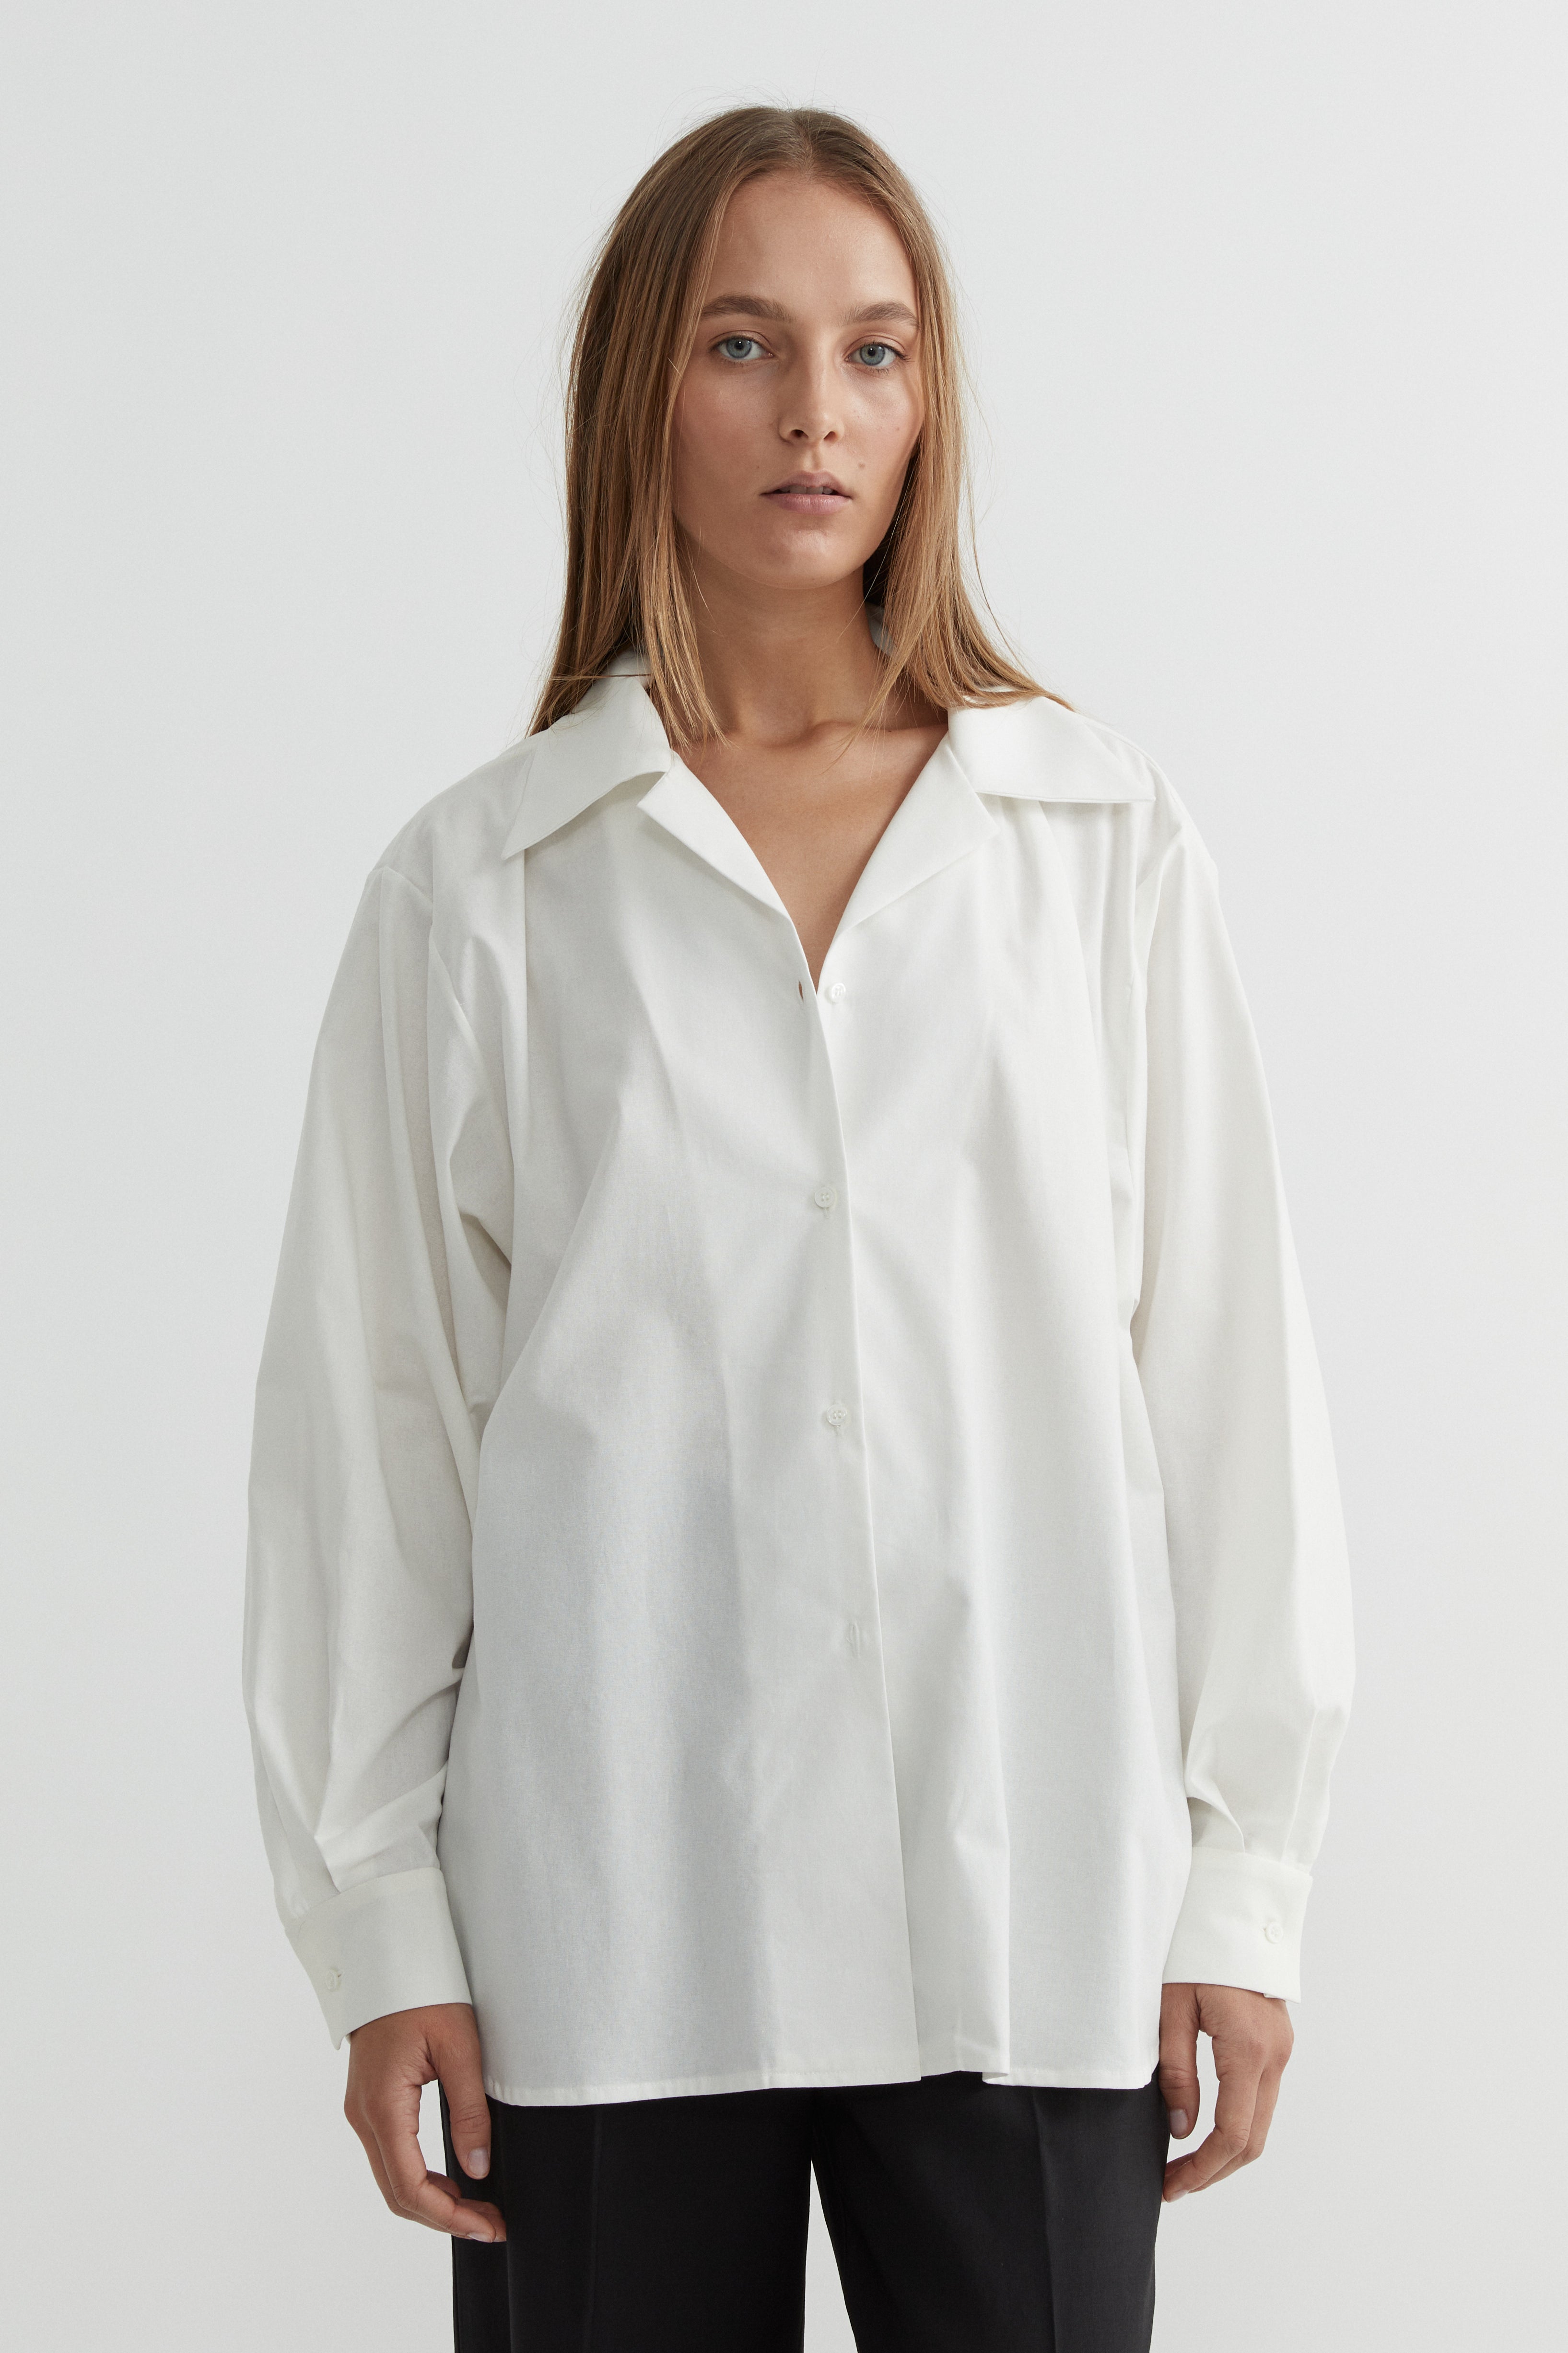 SAINT Lookbook Organic Cotton Shirt in natural / cream / white, long sleeve button up. Made in Australia